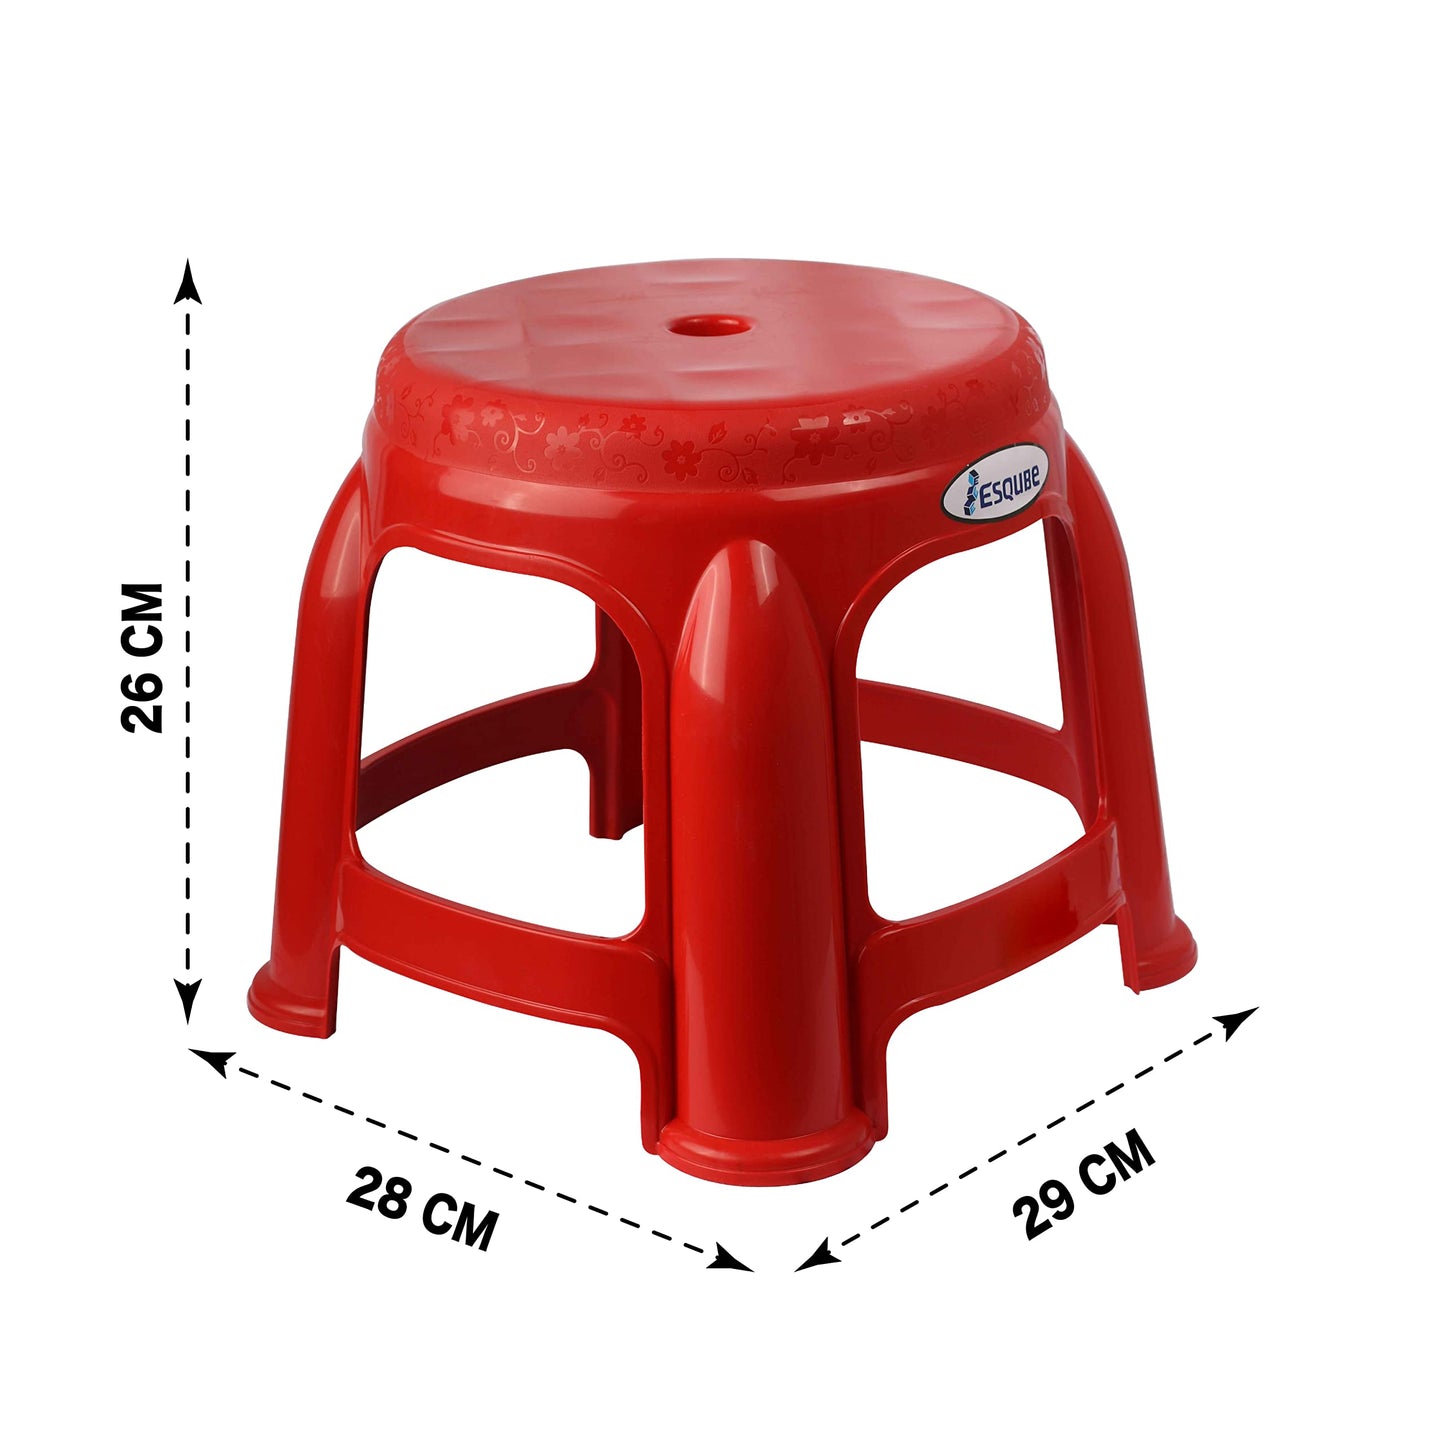 ESQUBE® Lilly Plastic Compact Step Stool Red Color